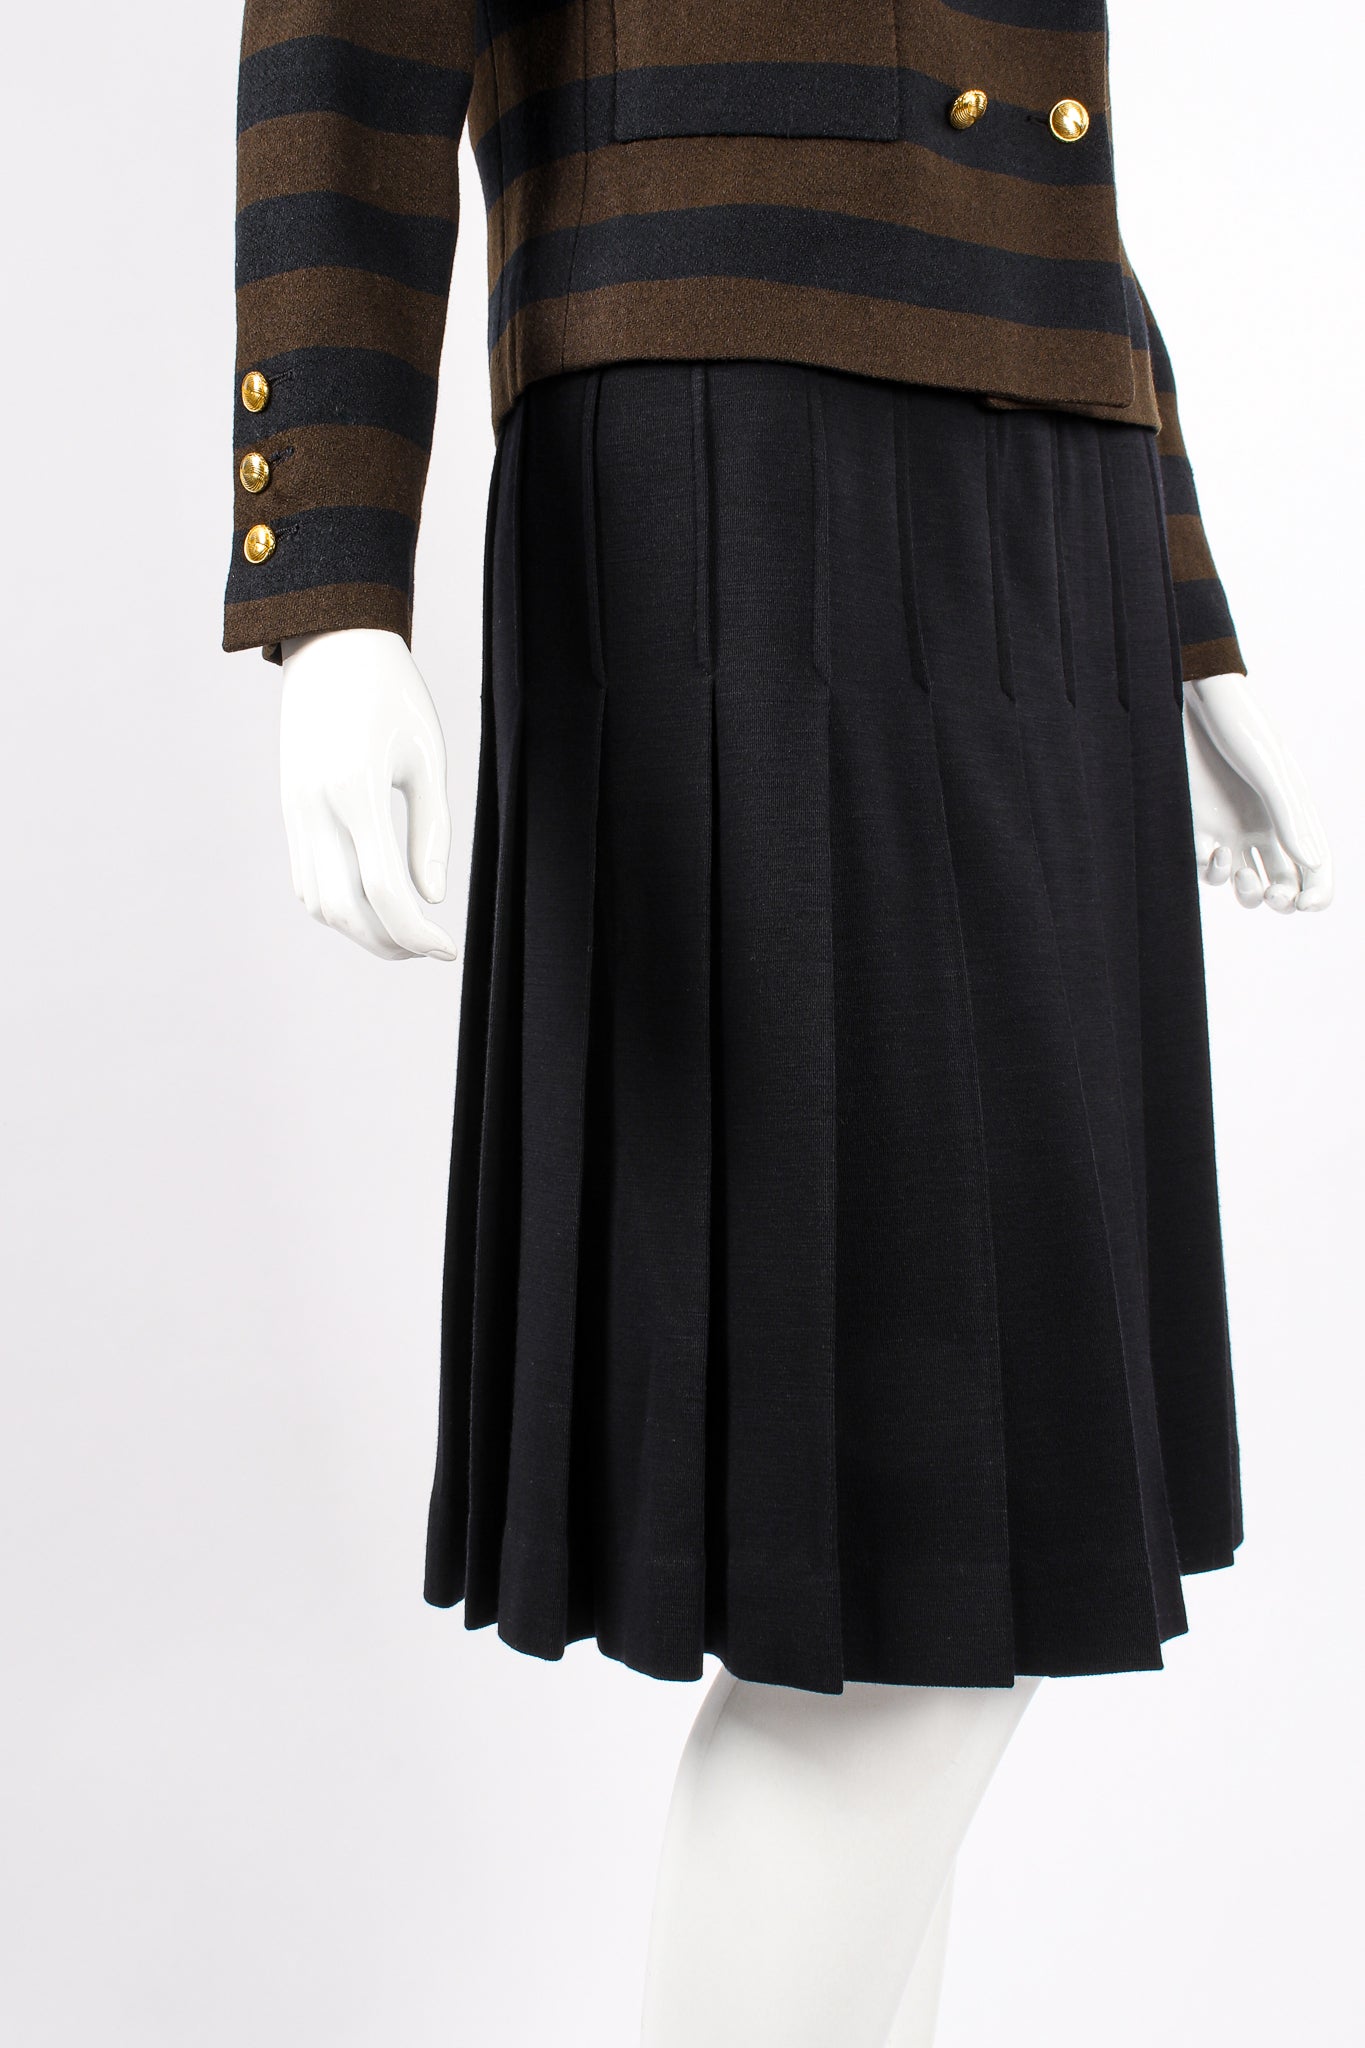 Vintage Chanel Striped Boxy Jacket & Skirt Set on Mannequin skirt at Recess Los Angeles